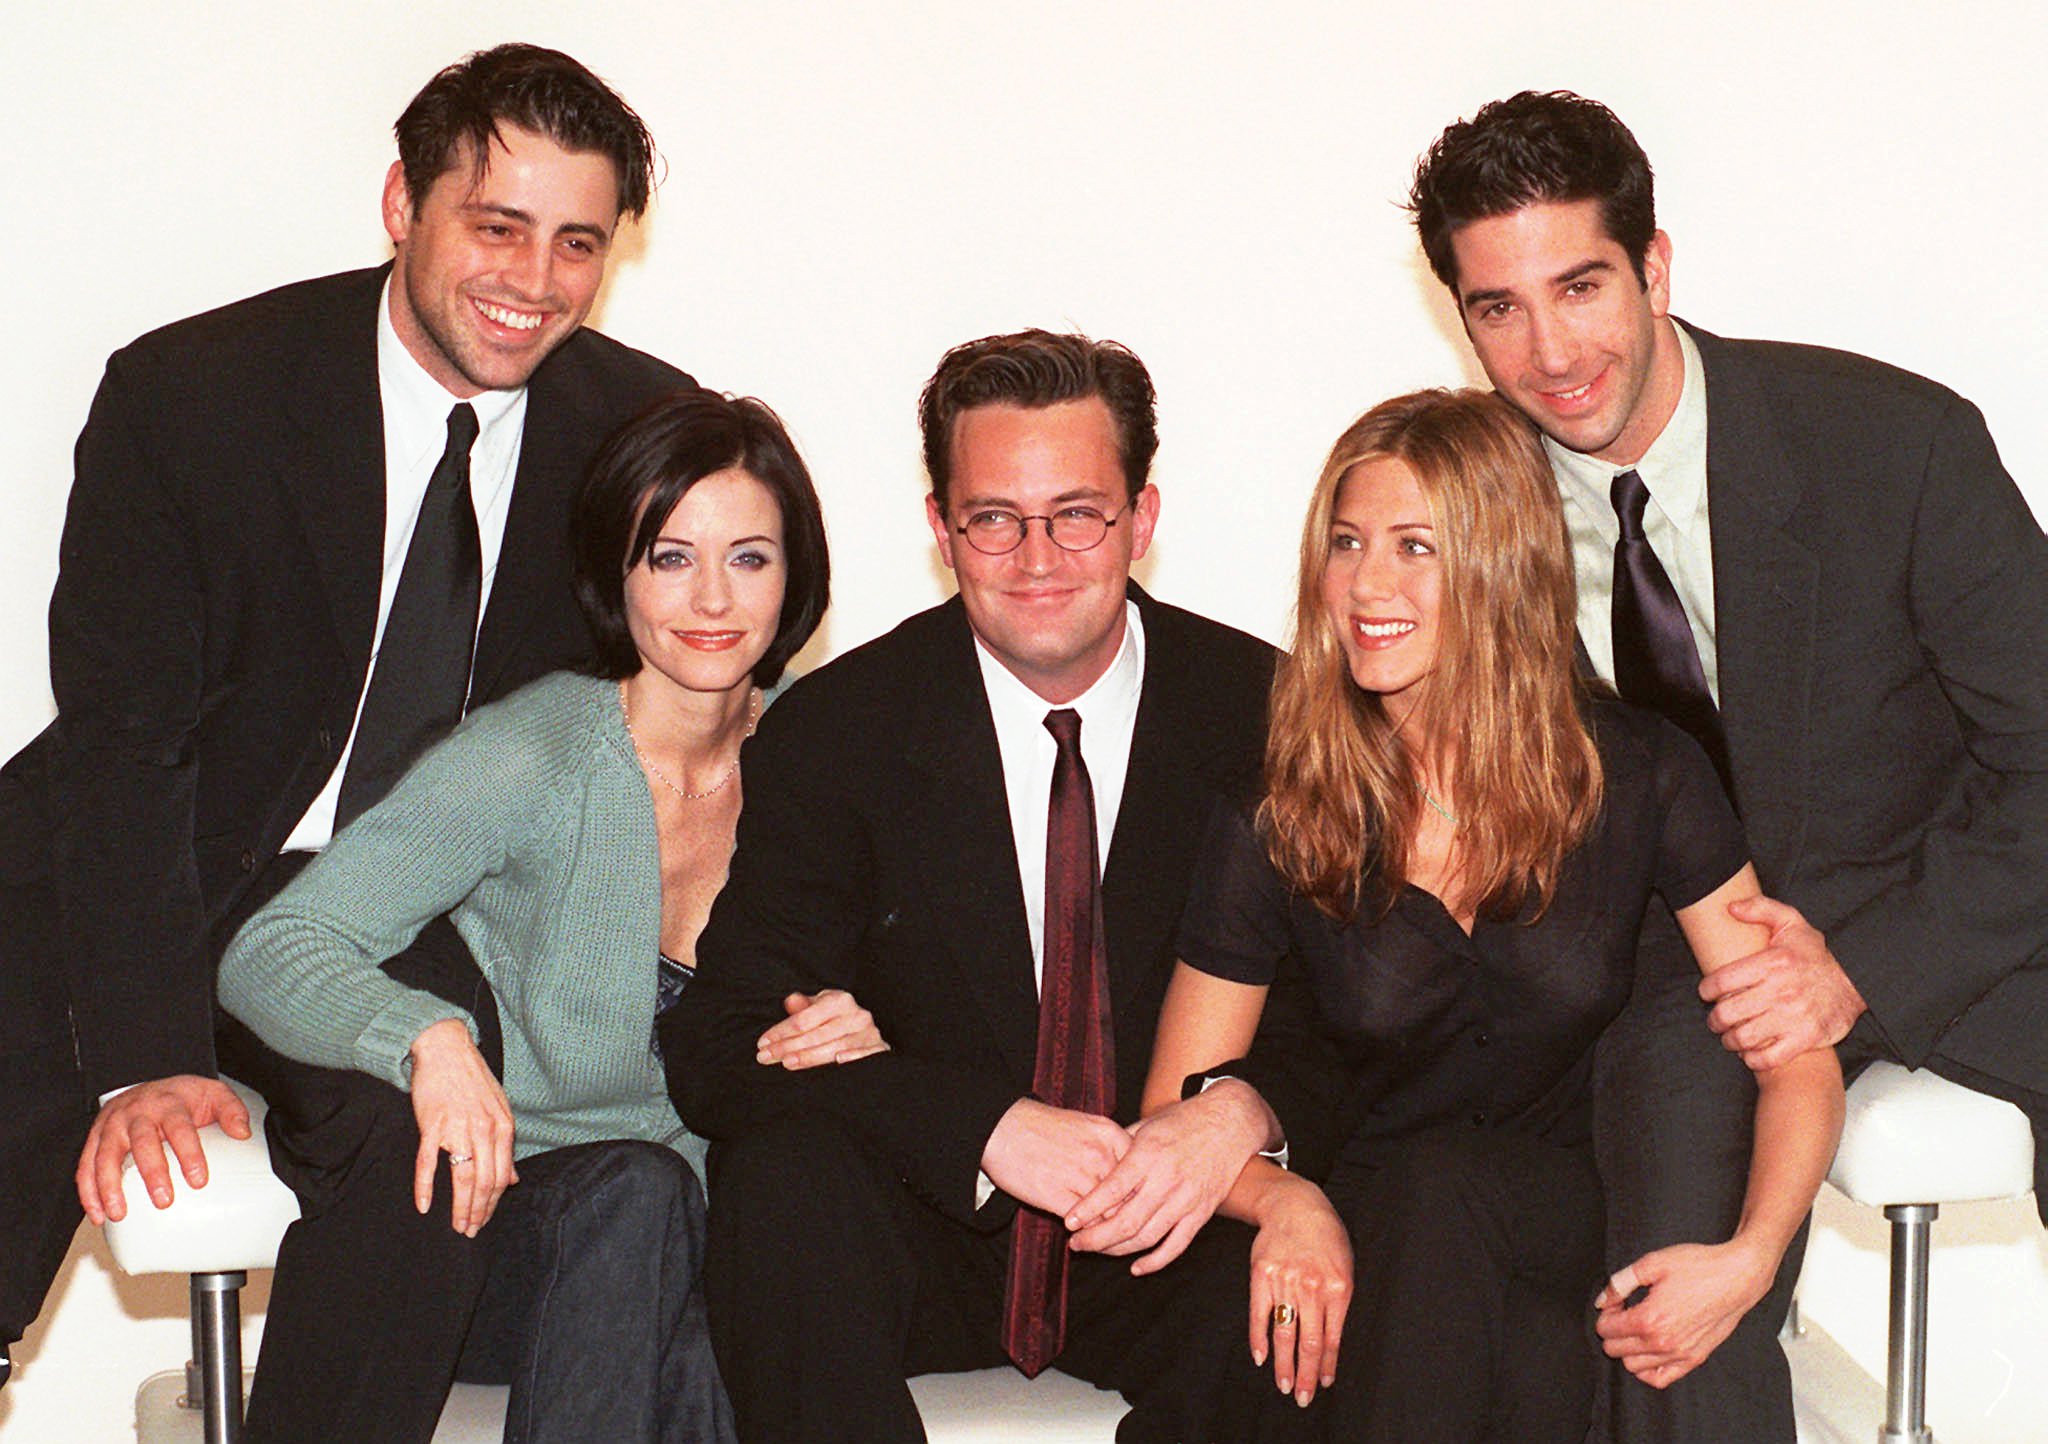 Friends' Behind-the-Scenes Why Love the Show